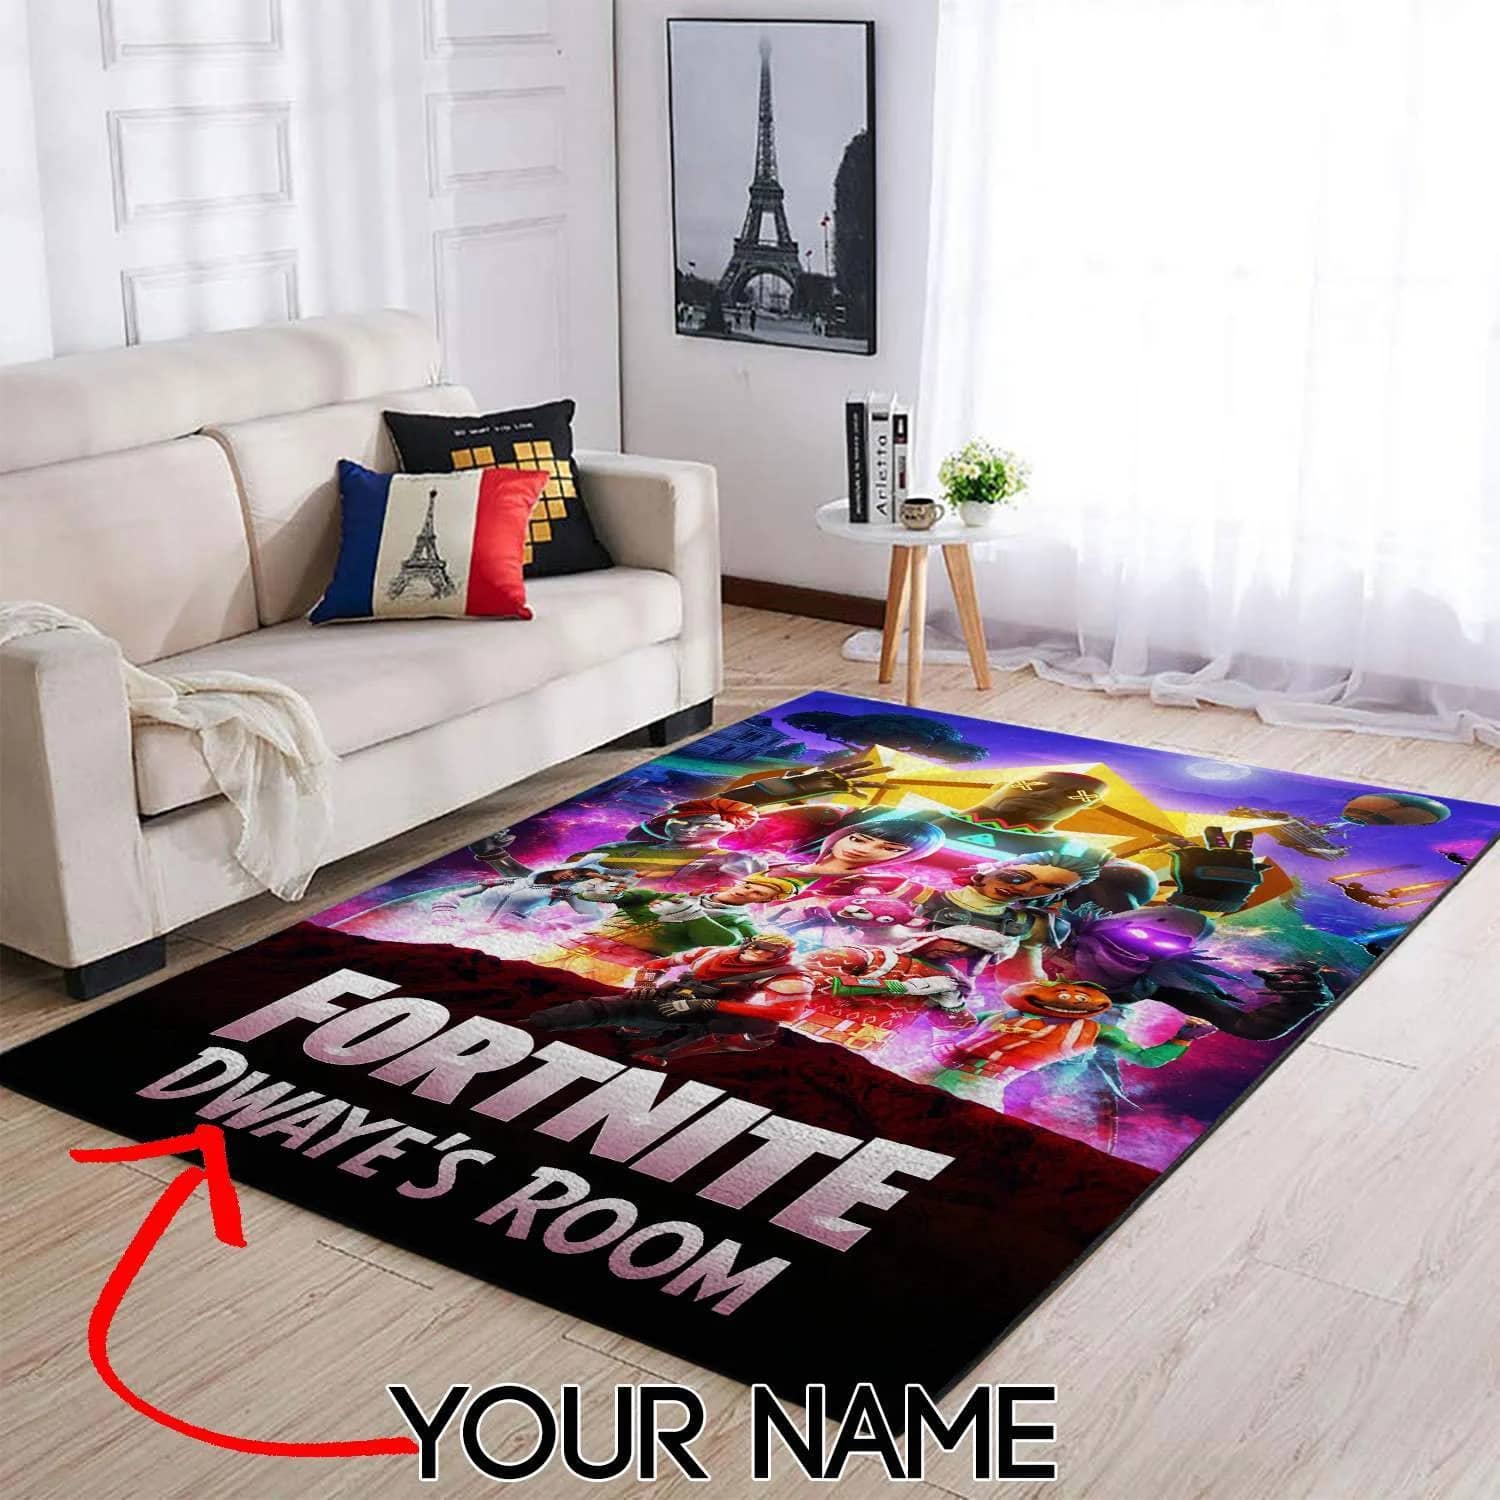 Customized Name Fortnite Infinity Wars Area Limited Edition Amazon Best Seller Sku 265661 Rug